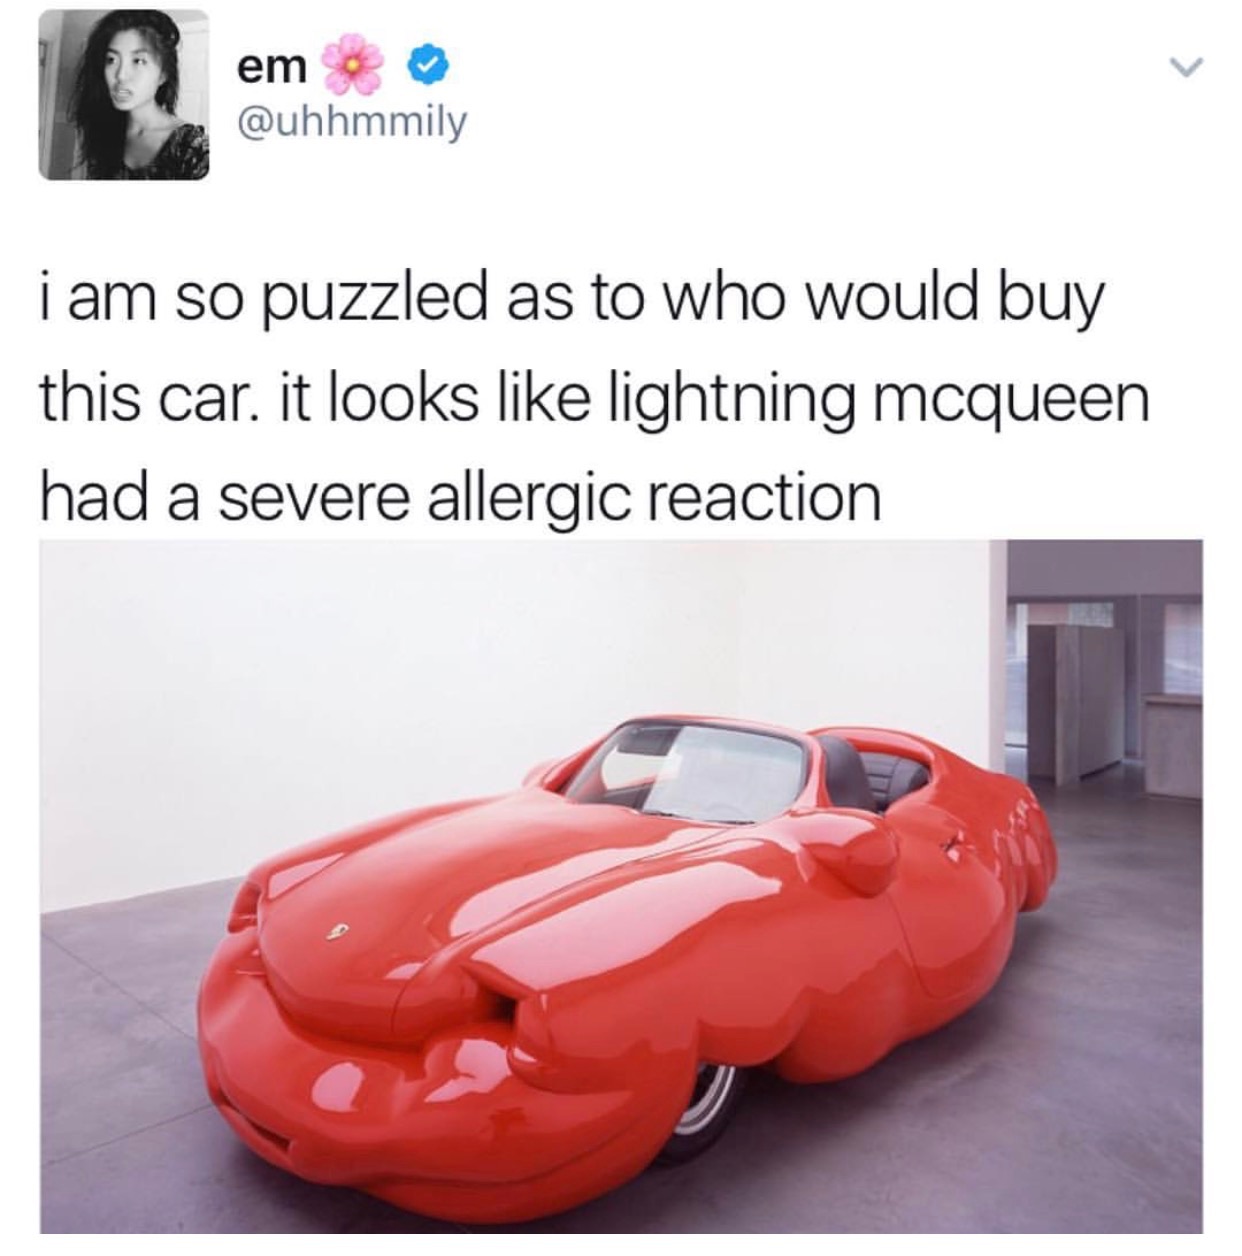 lightning mcqueen memes i am speed - em i am so puzzled as to who would buy this car. it looks lightning mcqueen had a severe allergic reaction